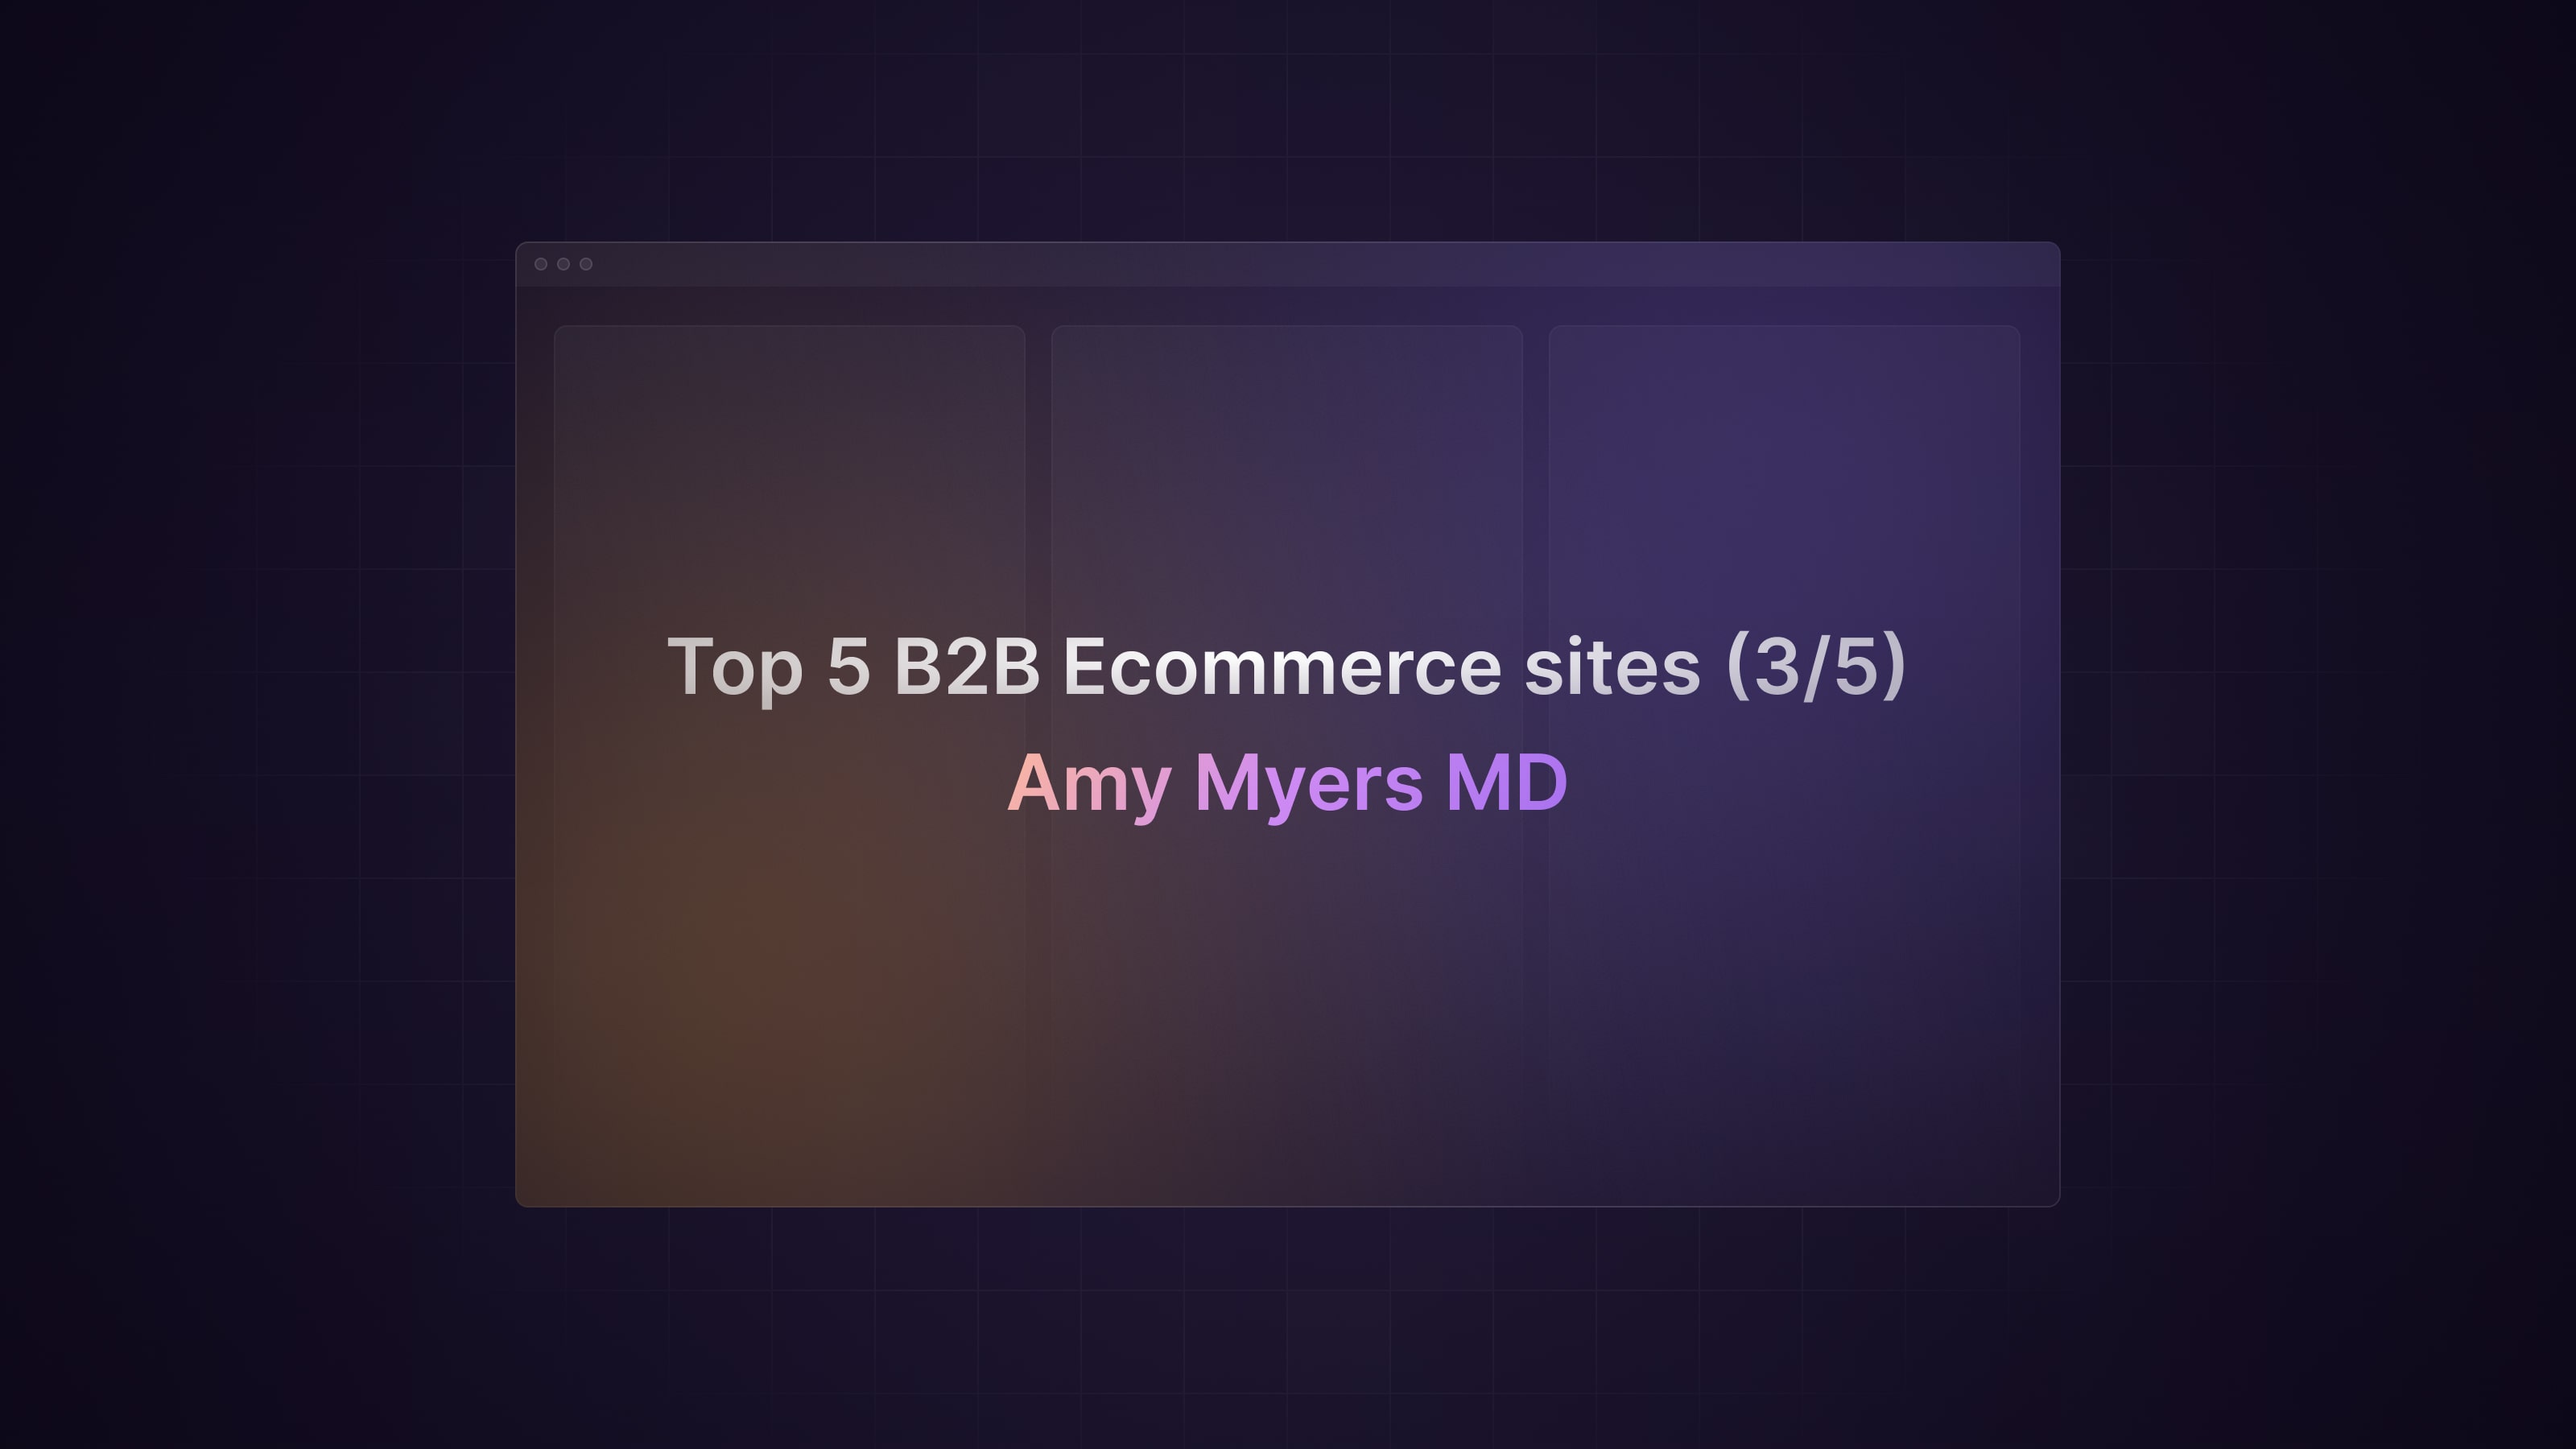 Top 5 B2B Ecommerce sites: Amy Myers MD (3/5)